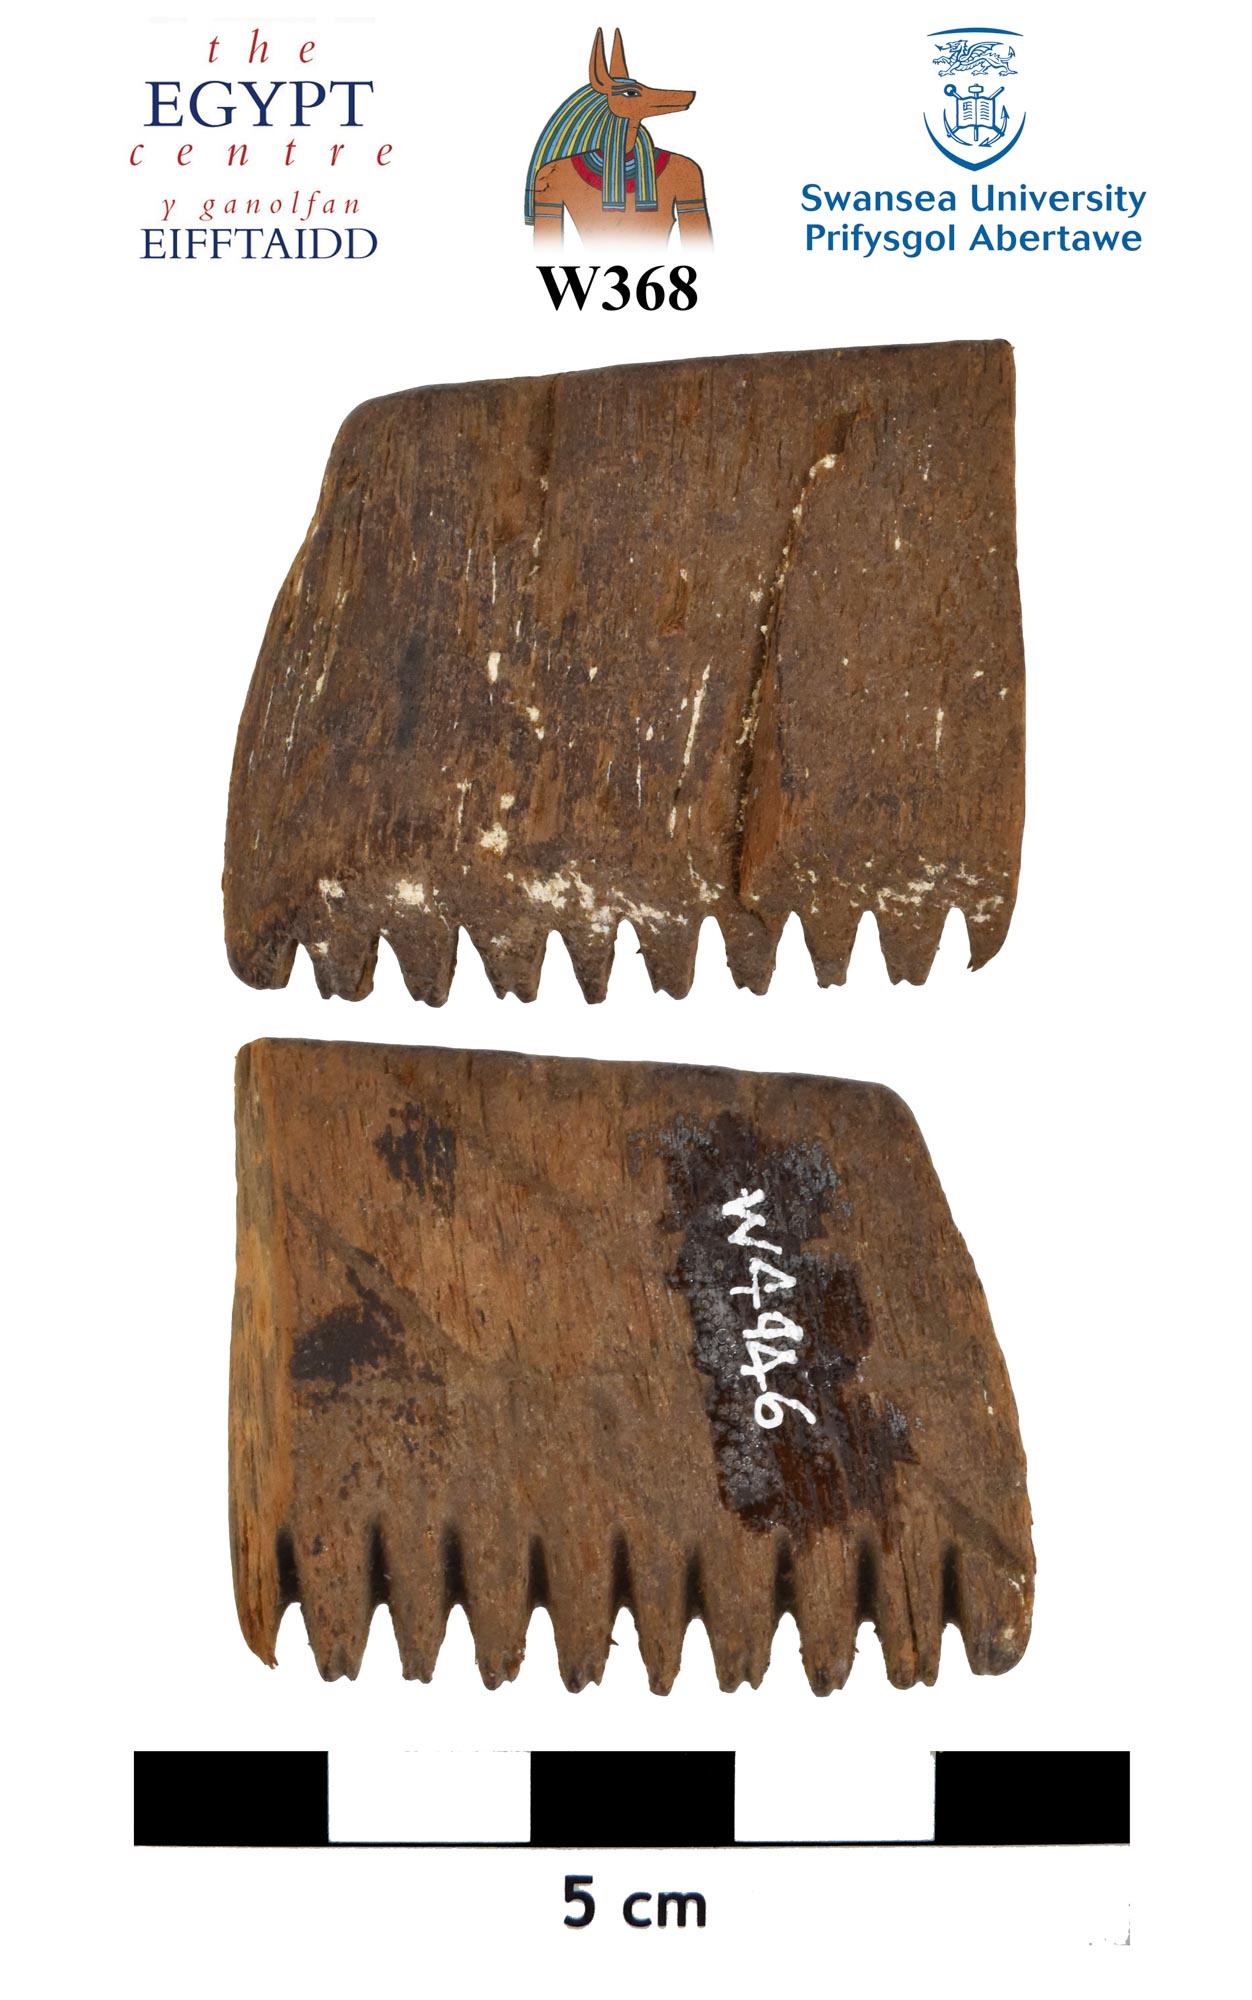 Image for: Fragment of a comb